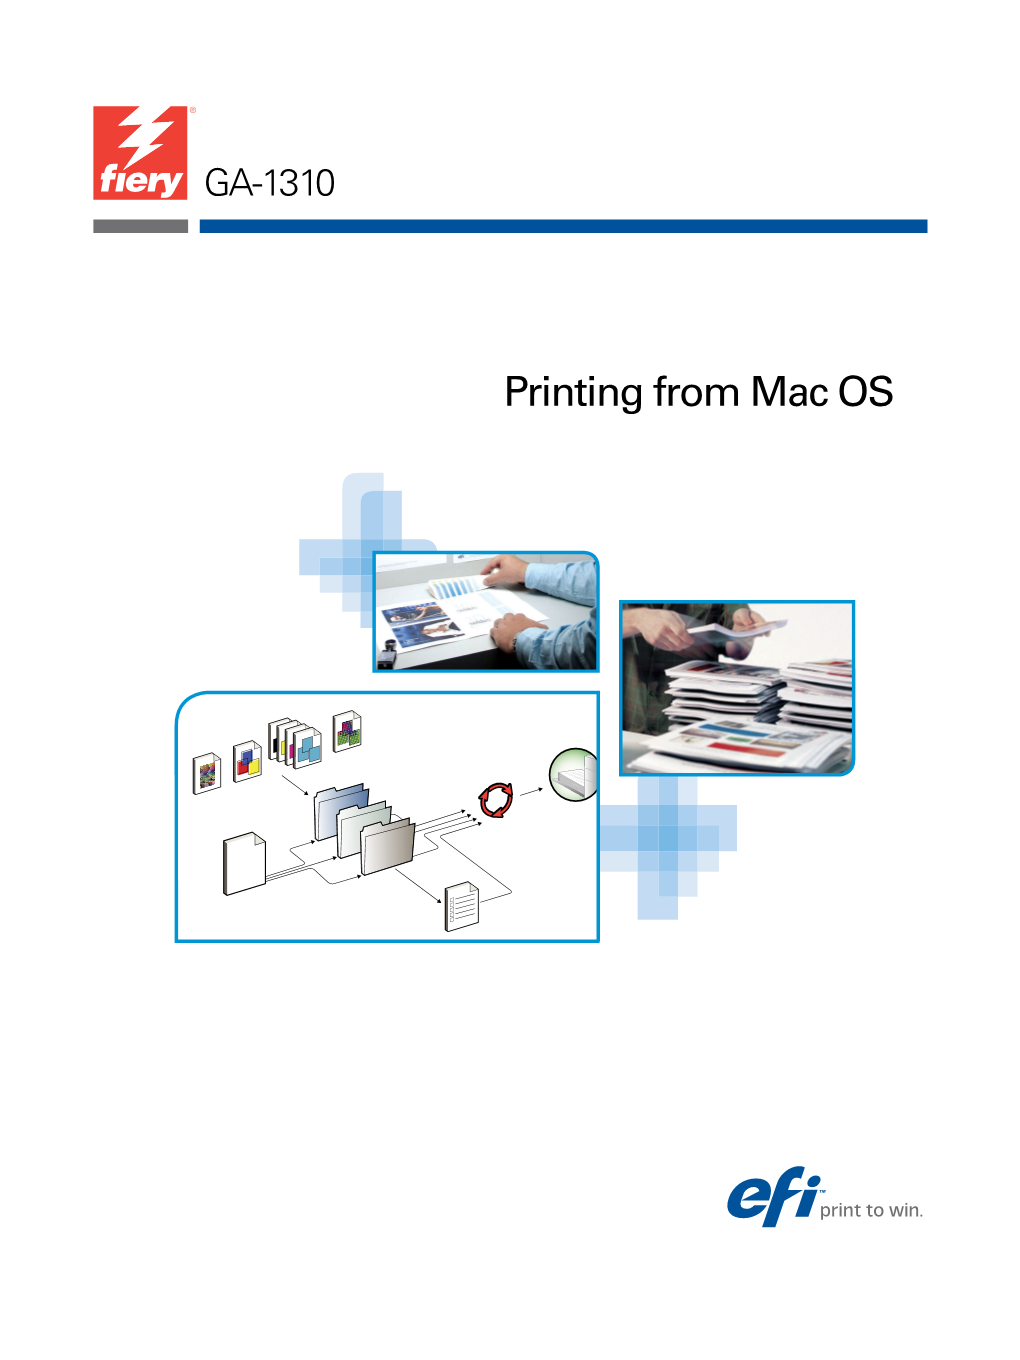 Printing from Mac OS © 2009 Electronics for Imaging, Inc